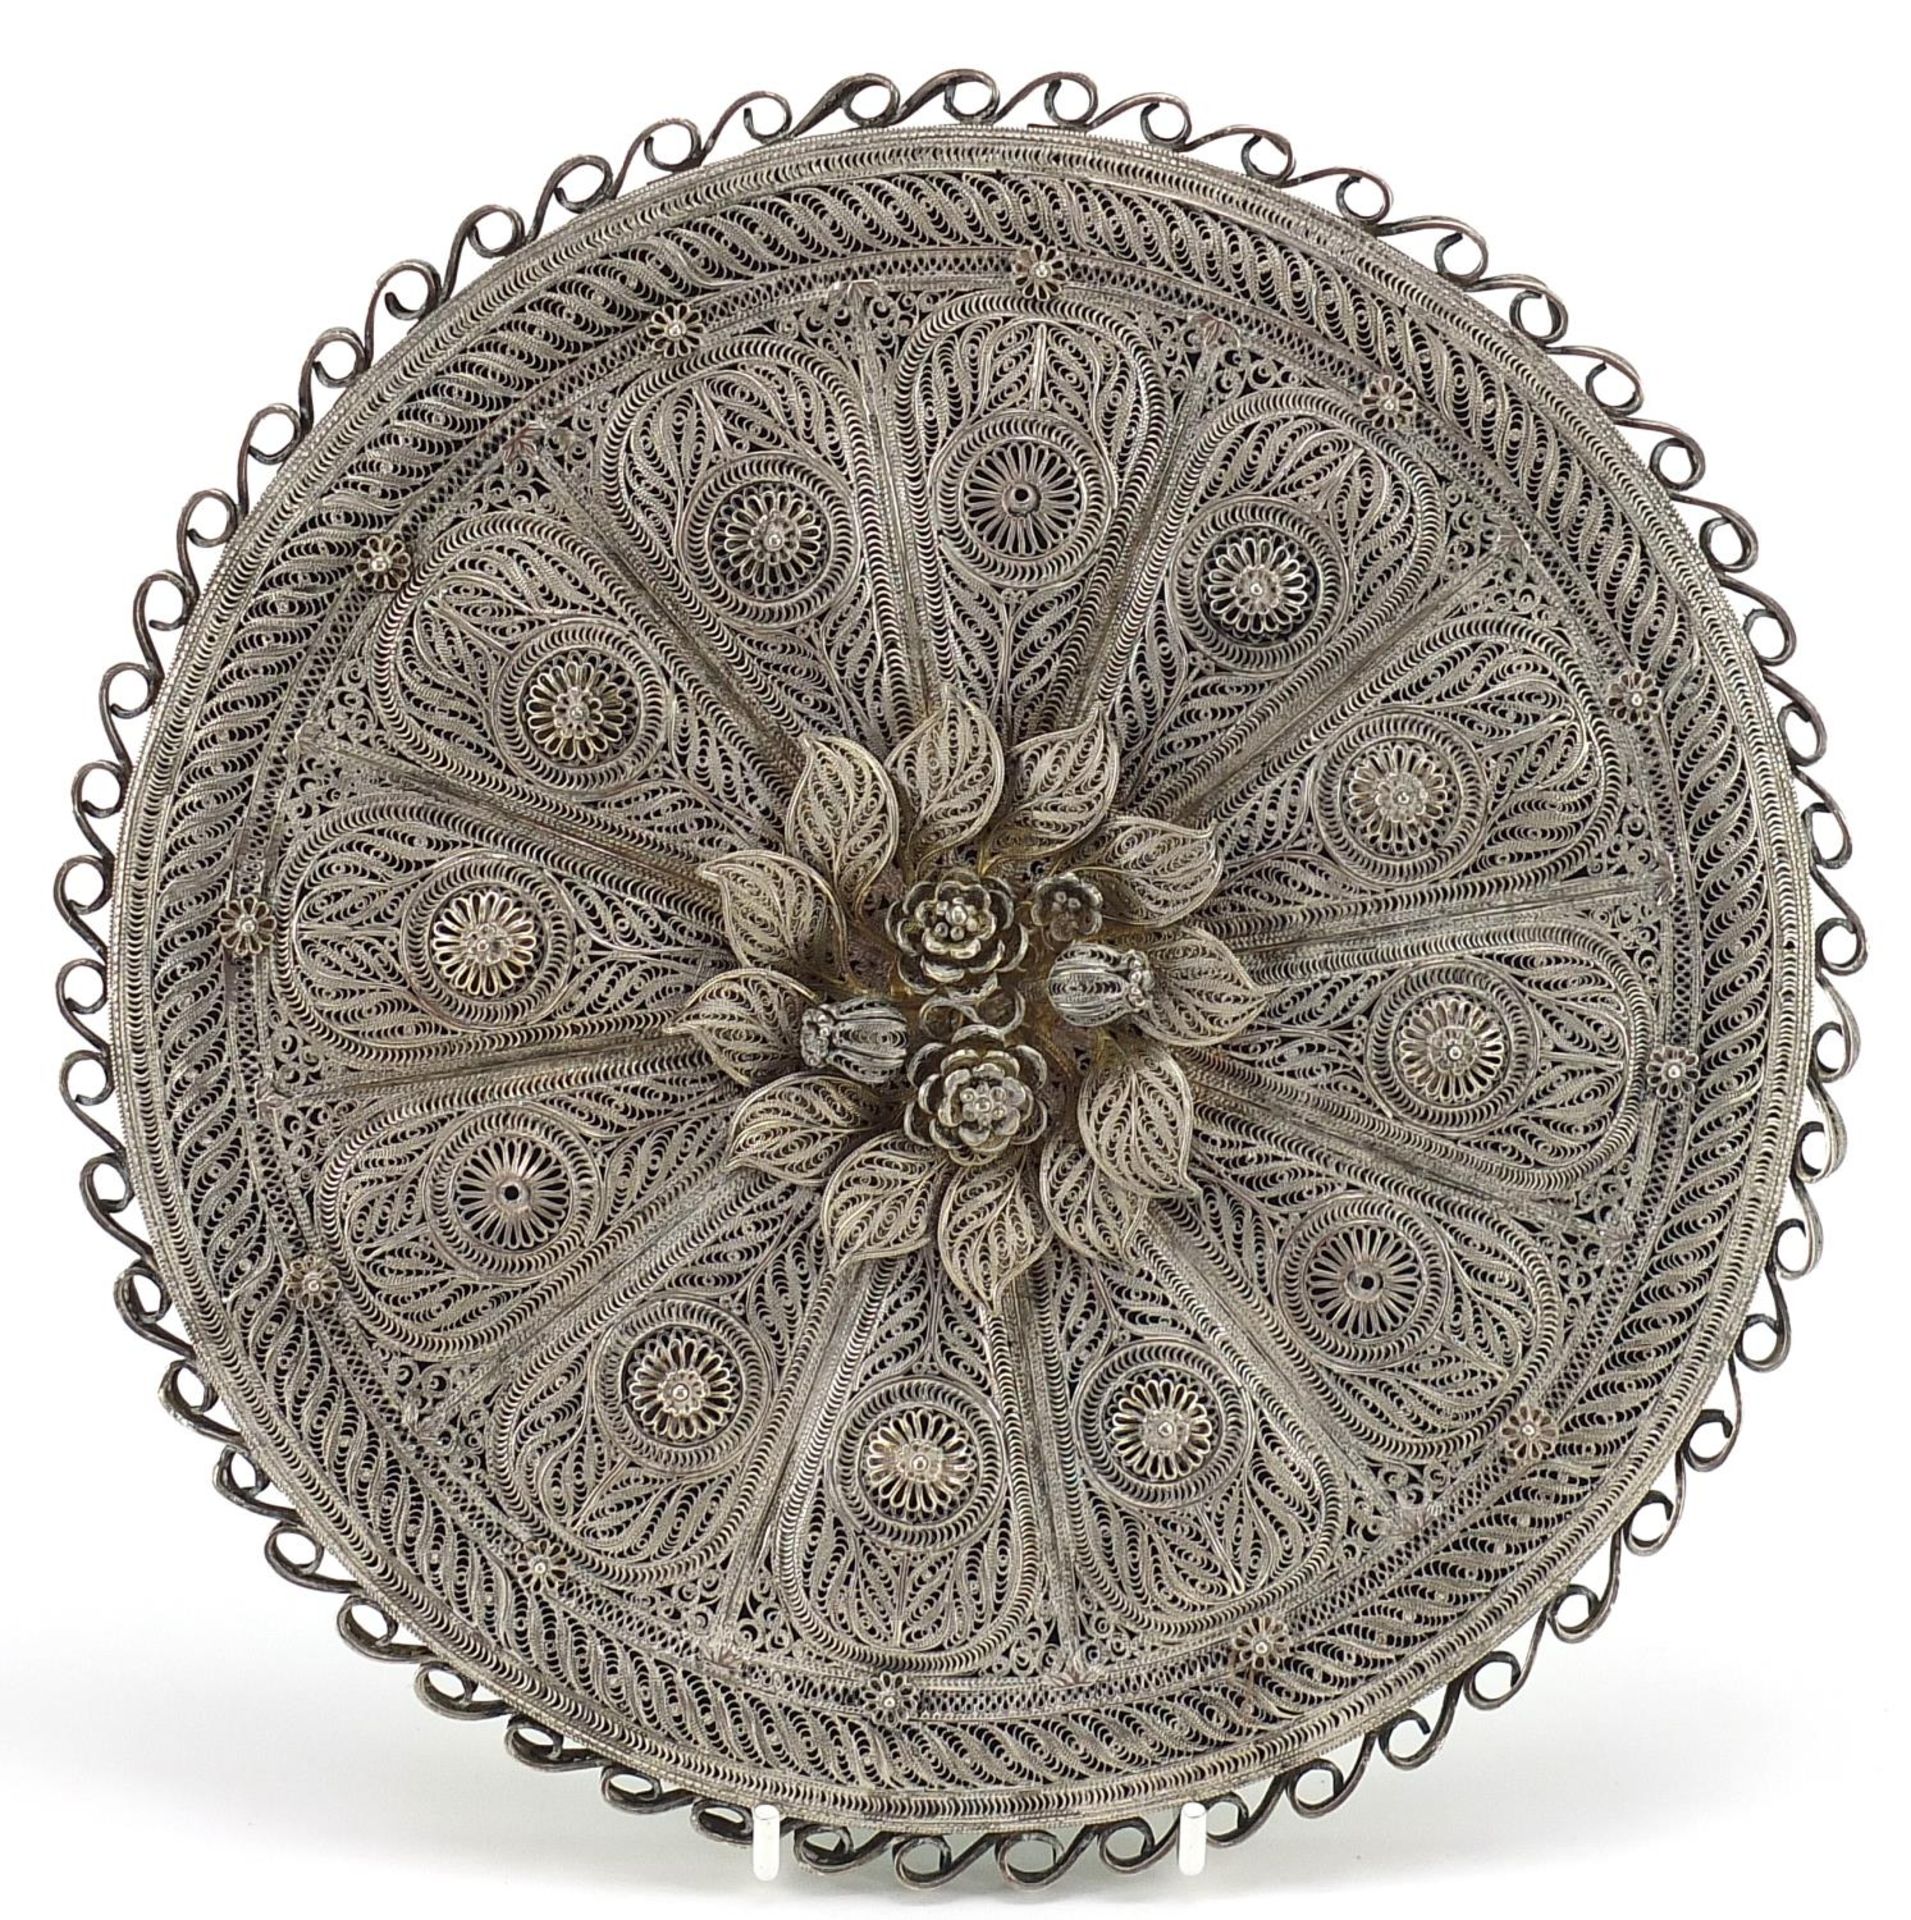 Indian Goa silver filigree mirror with bevelled glass, 23.5cm cm in diameter - Image 2 of 2